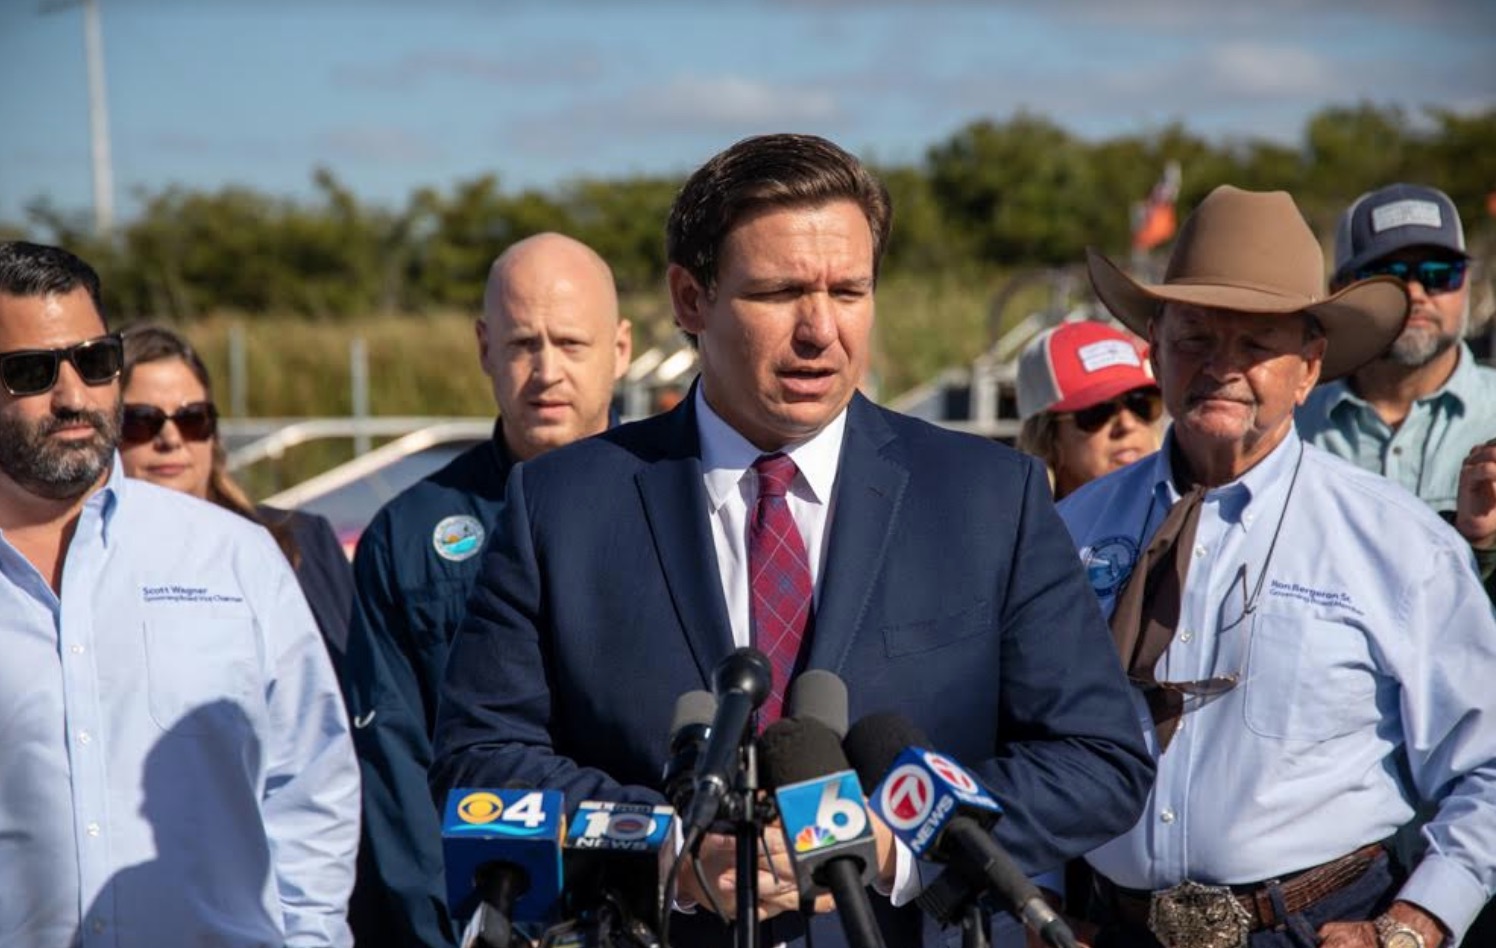 JUICE - Florida Politics' Juicy Read - 1.16.20 - DeSantis Gets Trolled - NO Cookie For You - Impeachment Heads To Senate - Epstein Trafficked Hundreds of Girls